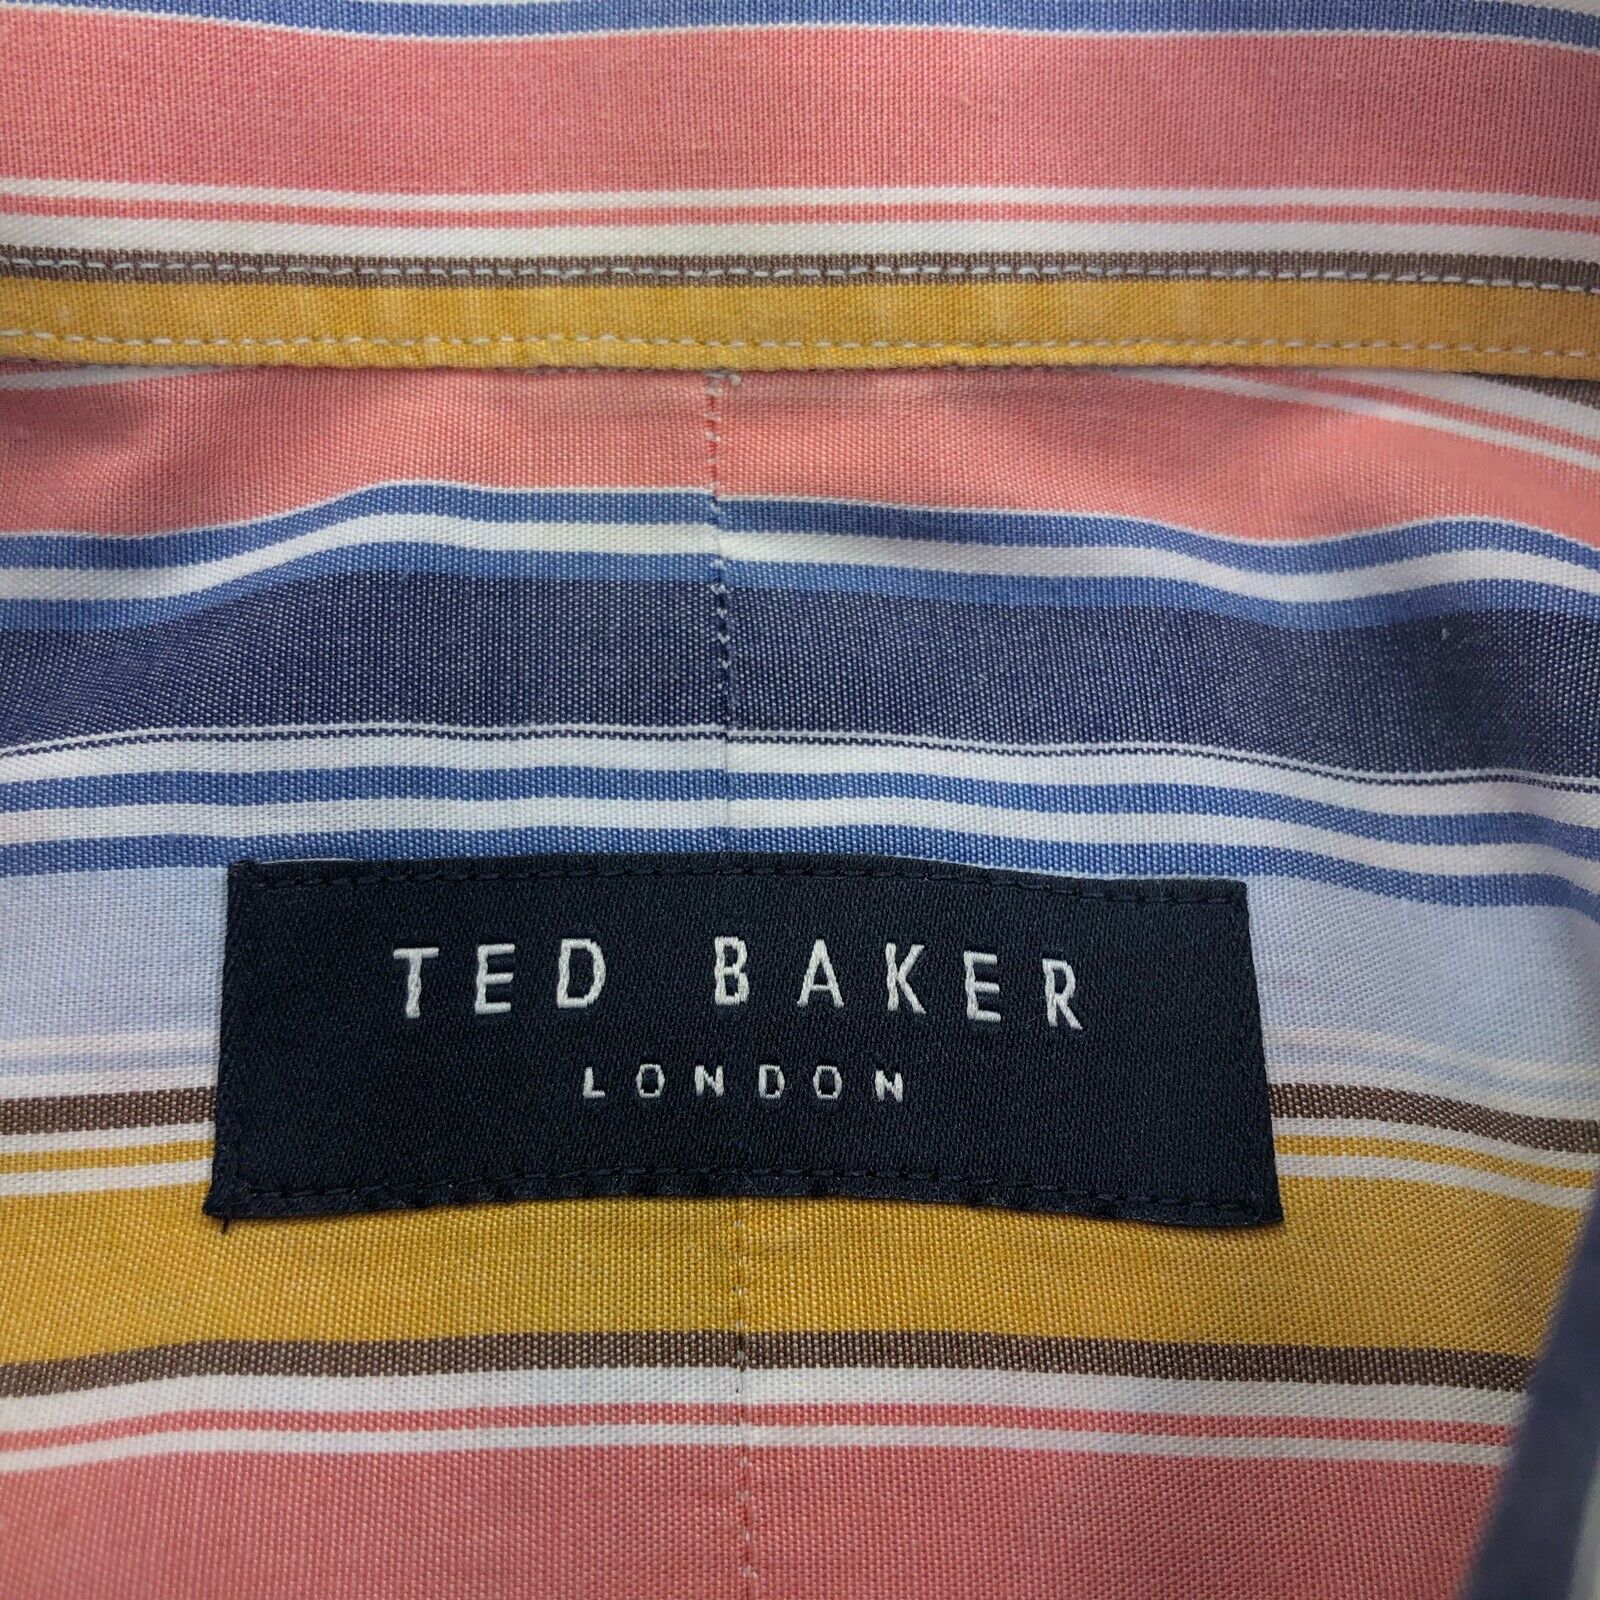 Ted Baker London Men's Button Front Long Sleeve Shirt Size 16.5 - 34/35  Striped